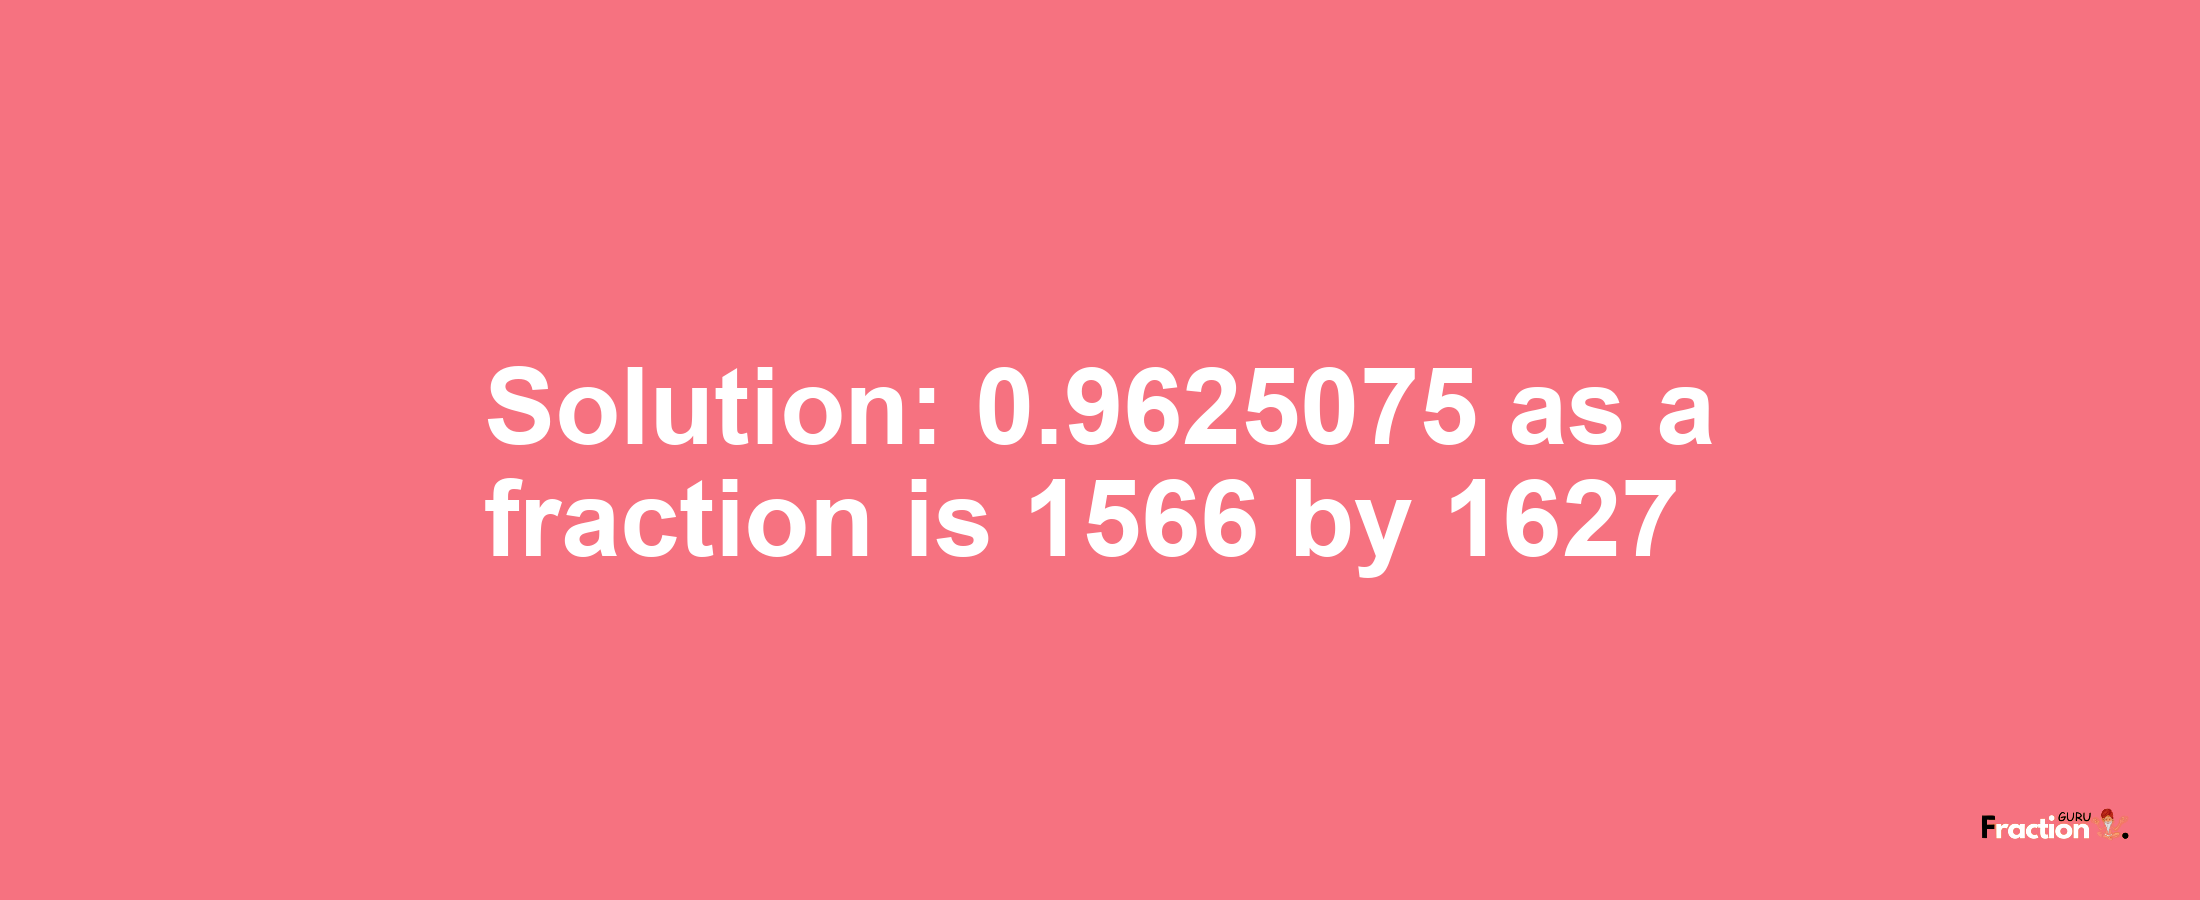 Solution:0.9625075 as a fraction is 1566/1627